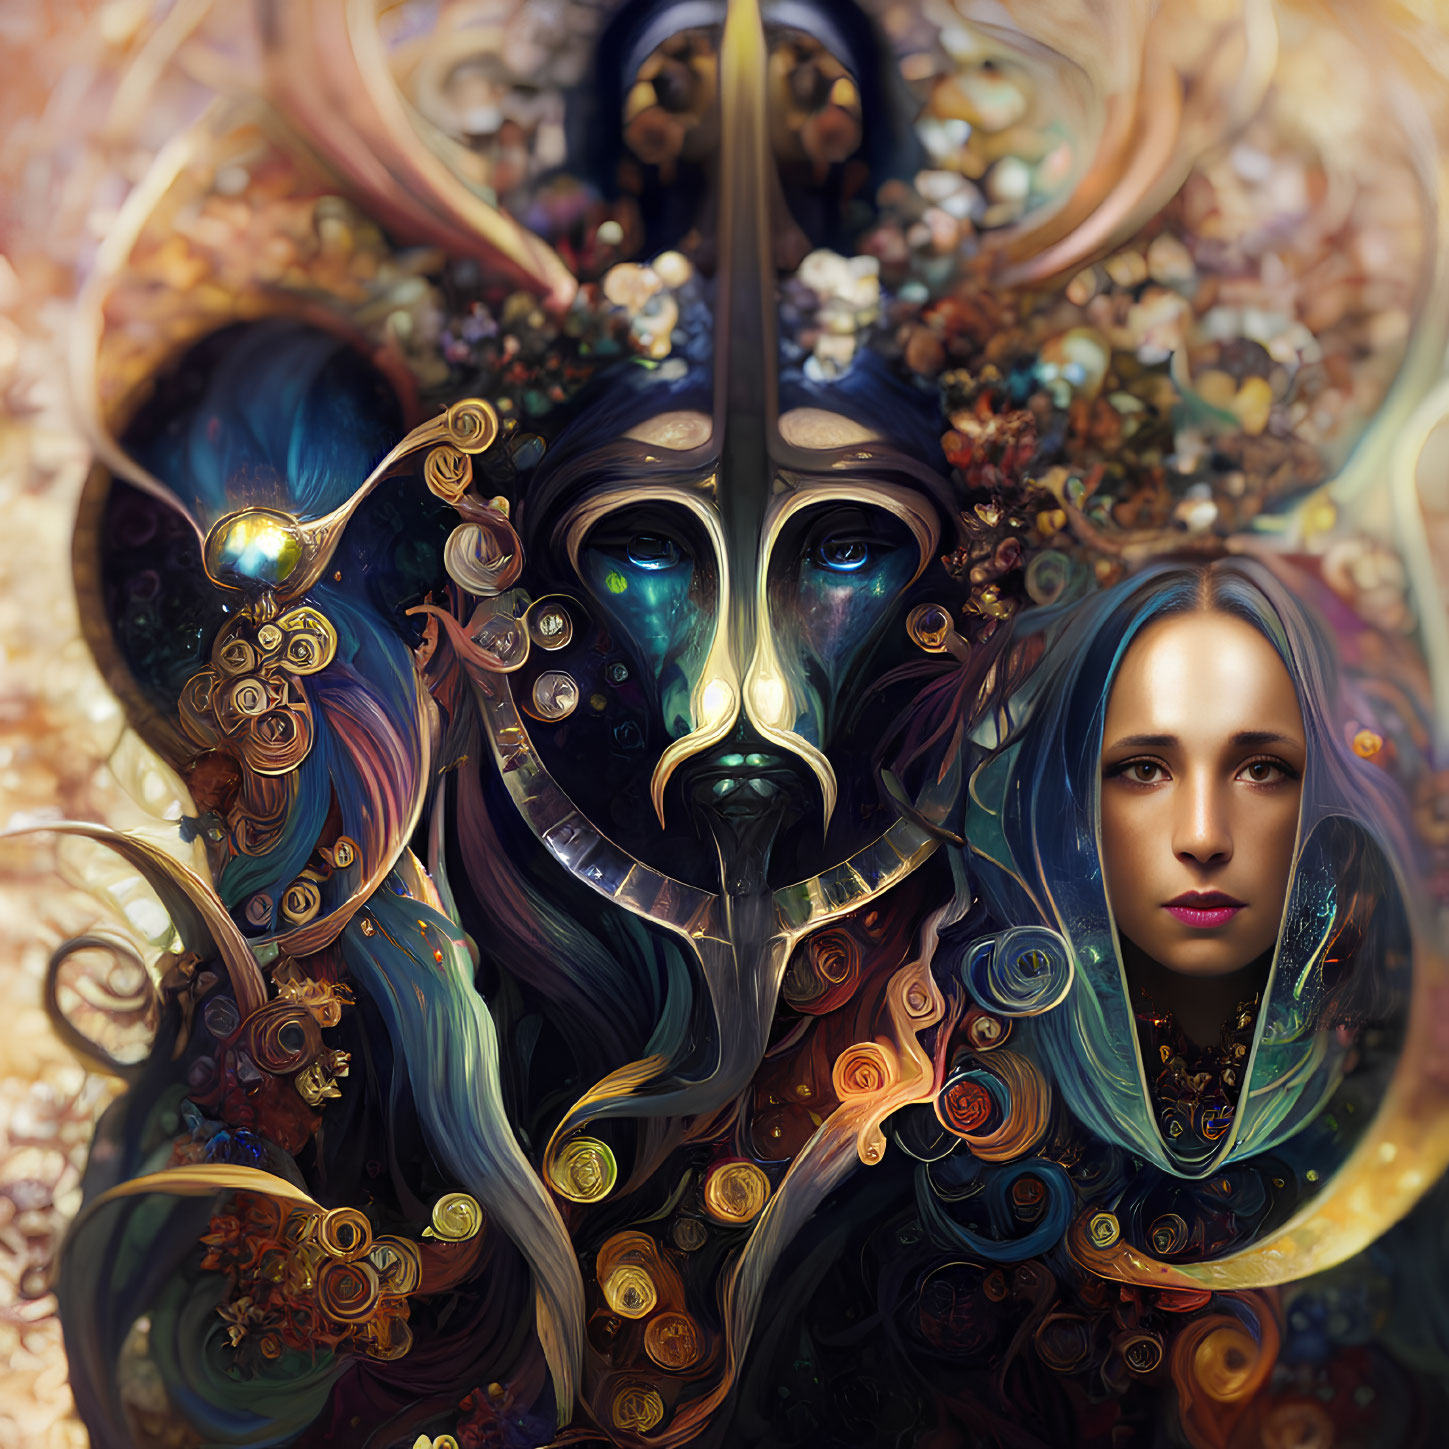 Surreal digital artwork: Woman's face merges with ornate mask amid golden swirls